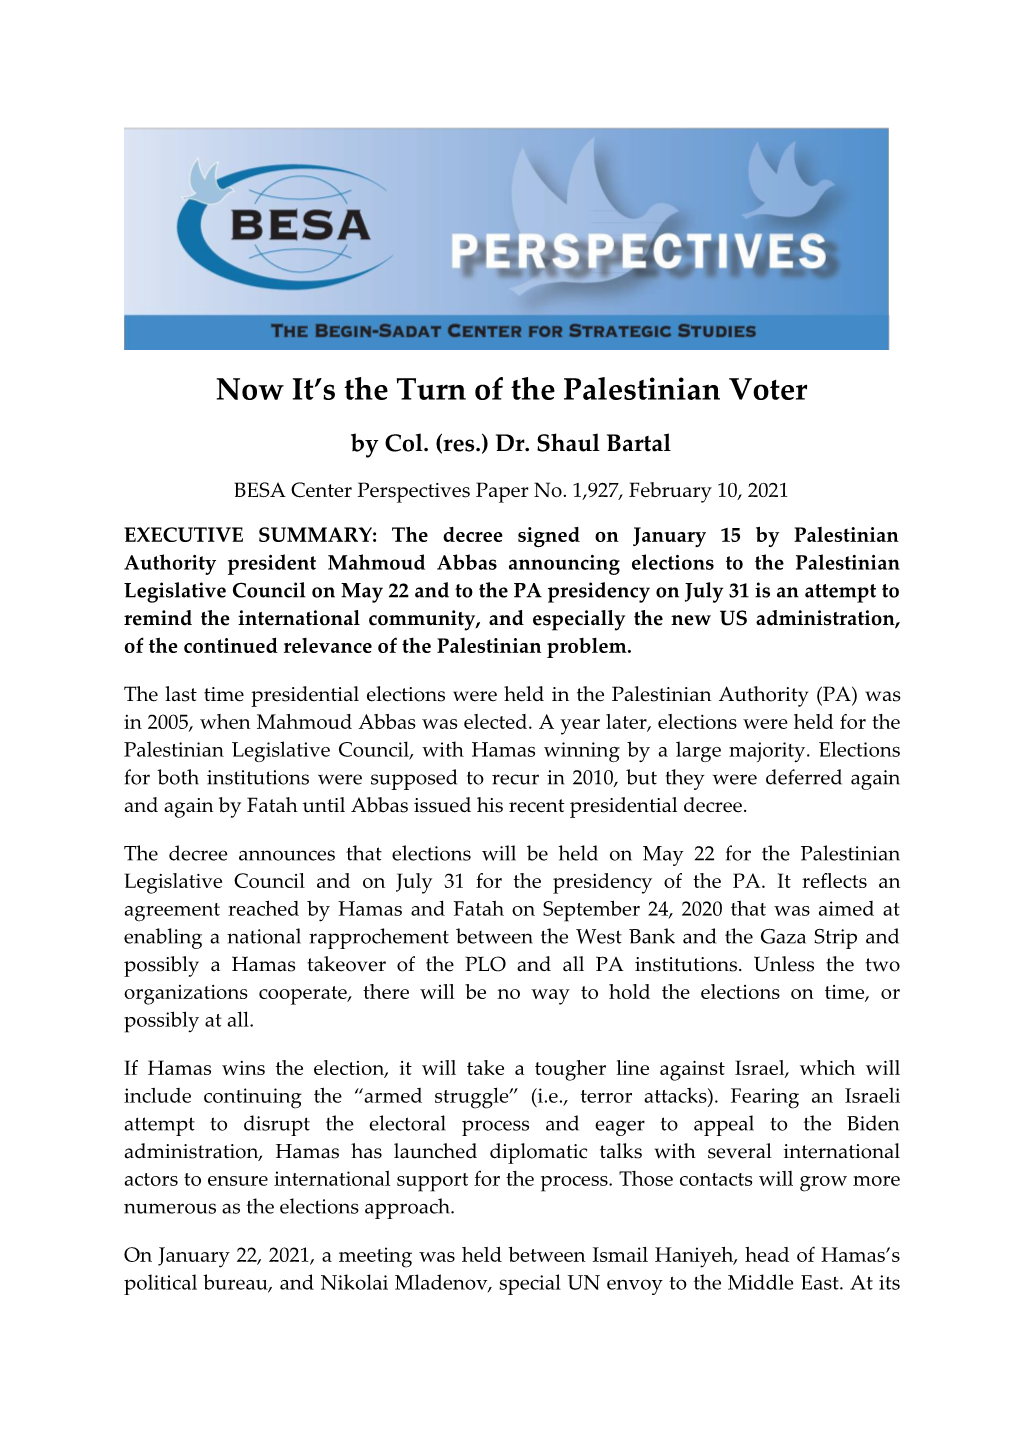 Now It's the Turn of the Palestinian Voter